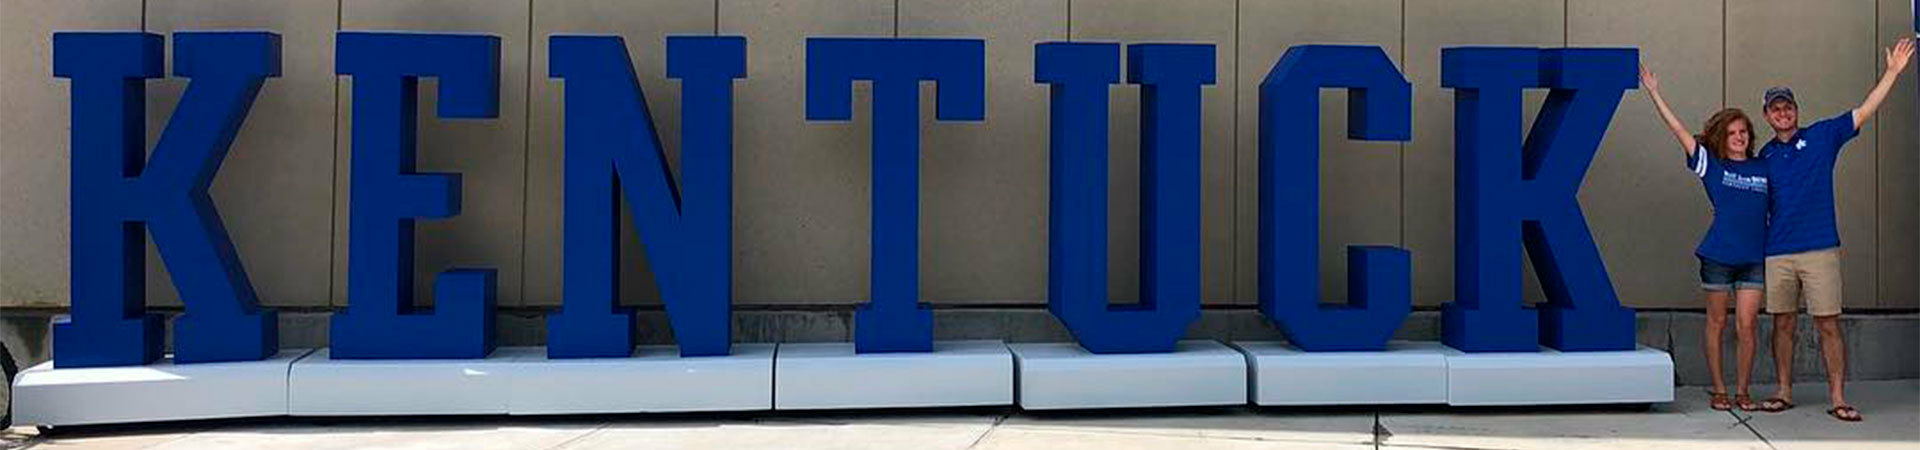 3-D foam letters set up as photo-op for the University of Kentucky.